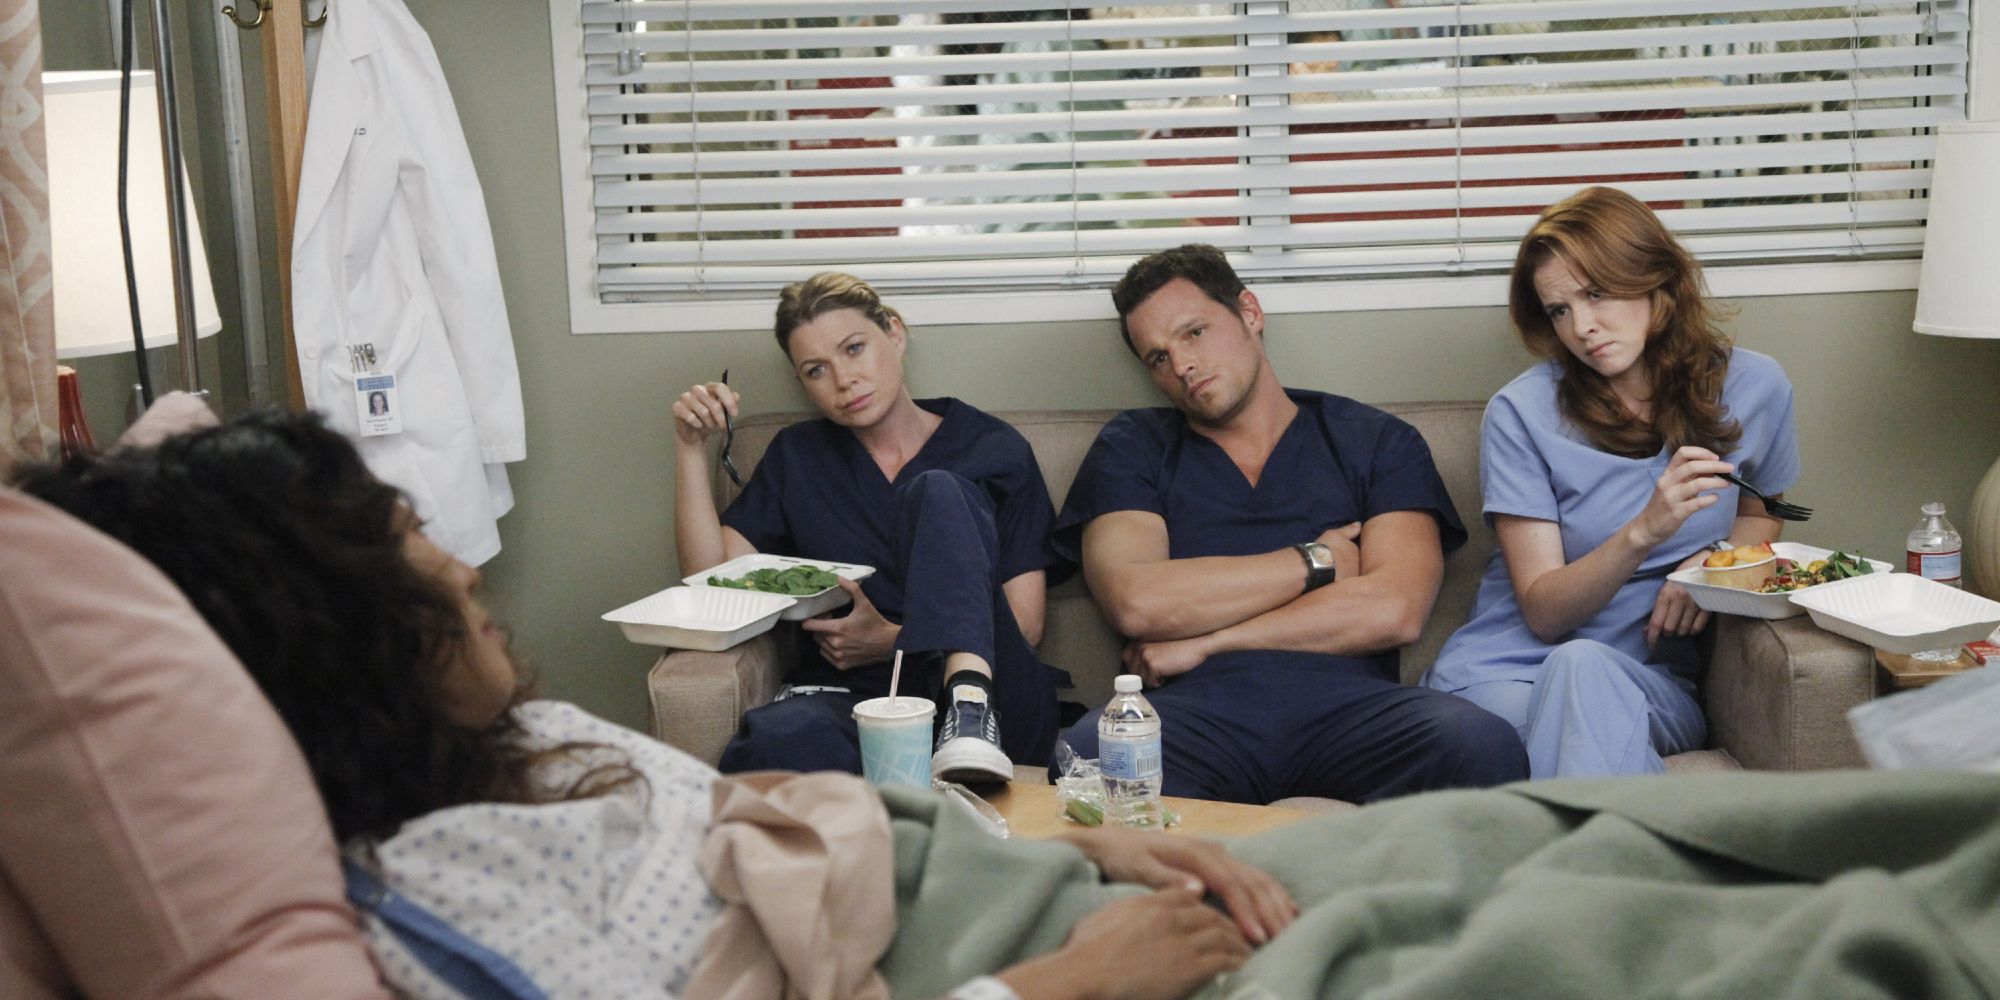 Cristina in hospital room with Meredith Alex and April on Greys Anatomy